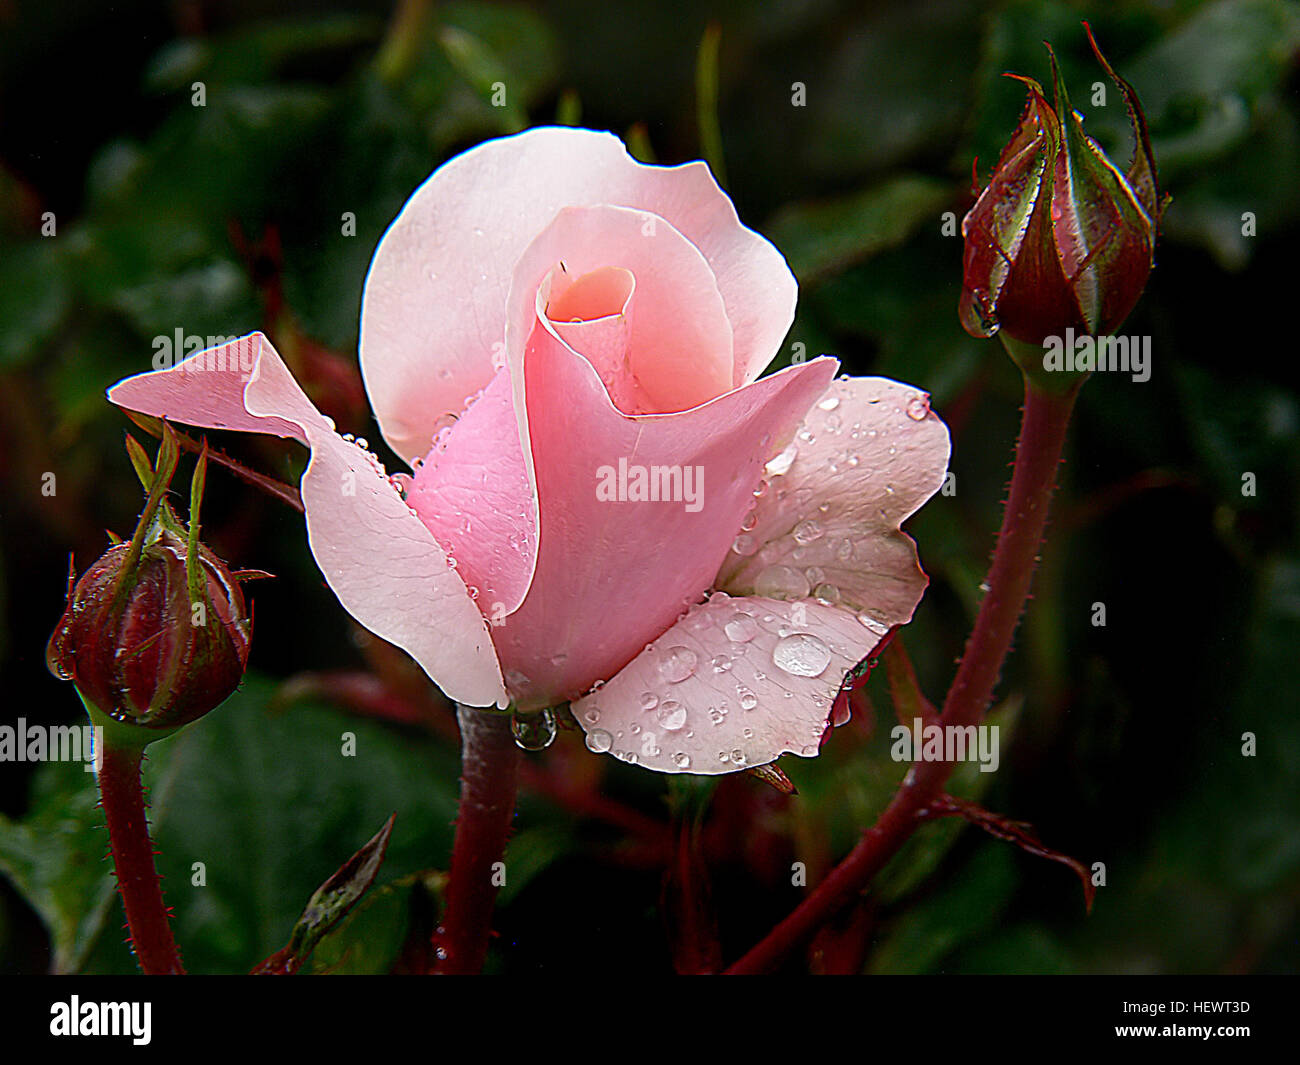 ication (,),,,Blooms,Valintine heart Rose,florals,flowers,gardening,roses Stock Photo